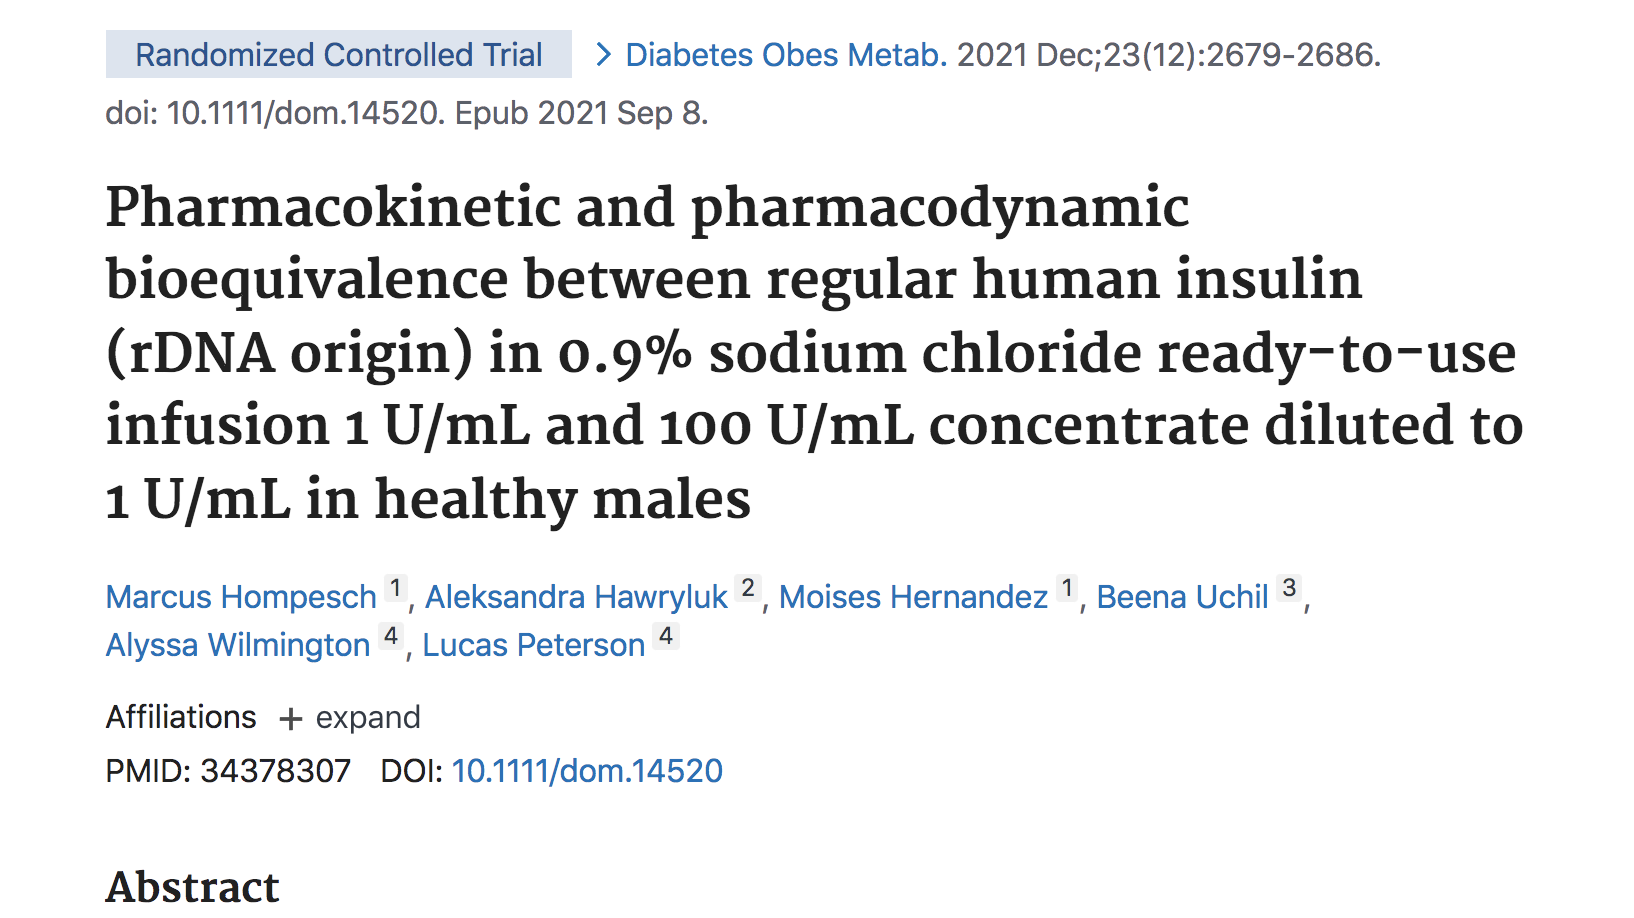 image of Pharmacokinetic and Pharmacodynamic Bioequivalence between regular human insulin [rDNA origin] in 0.9% sodium chloride ready-to-use infusion 1U/mL and in 100U/mL concentrate diluted to 1U/mL in Healthy Males.